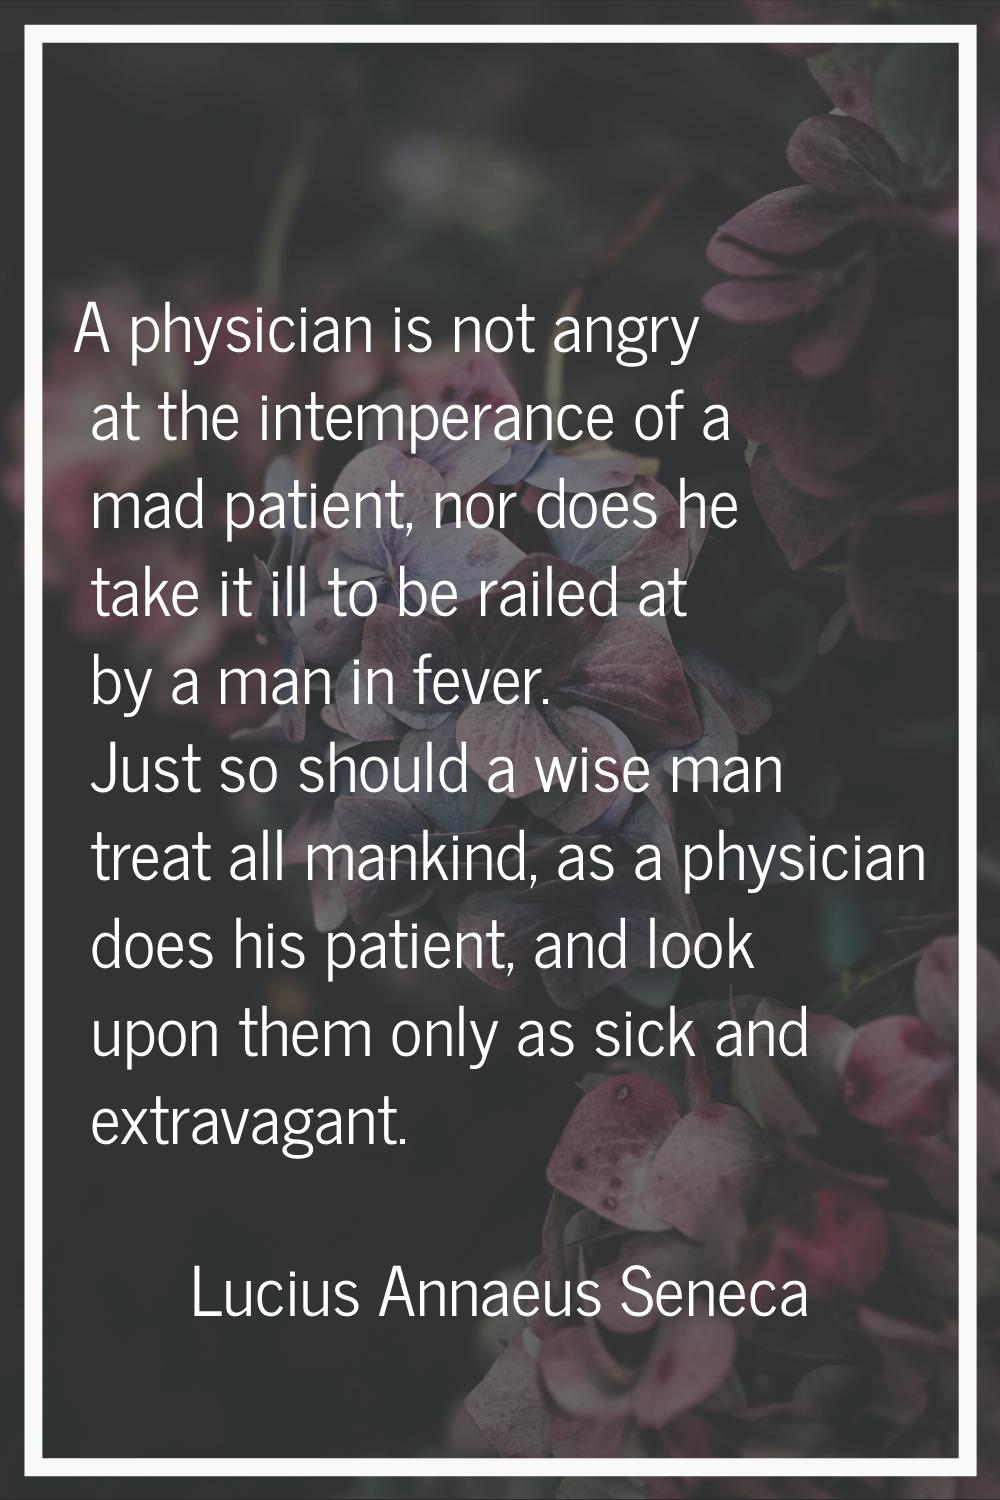 A physician is not angry at the intemperance of a mad patient, nor does he take it ill to be railed